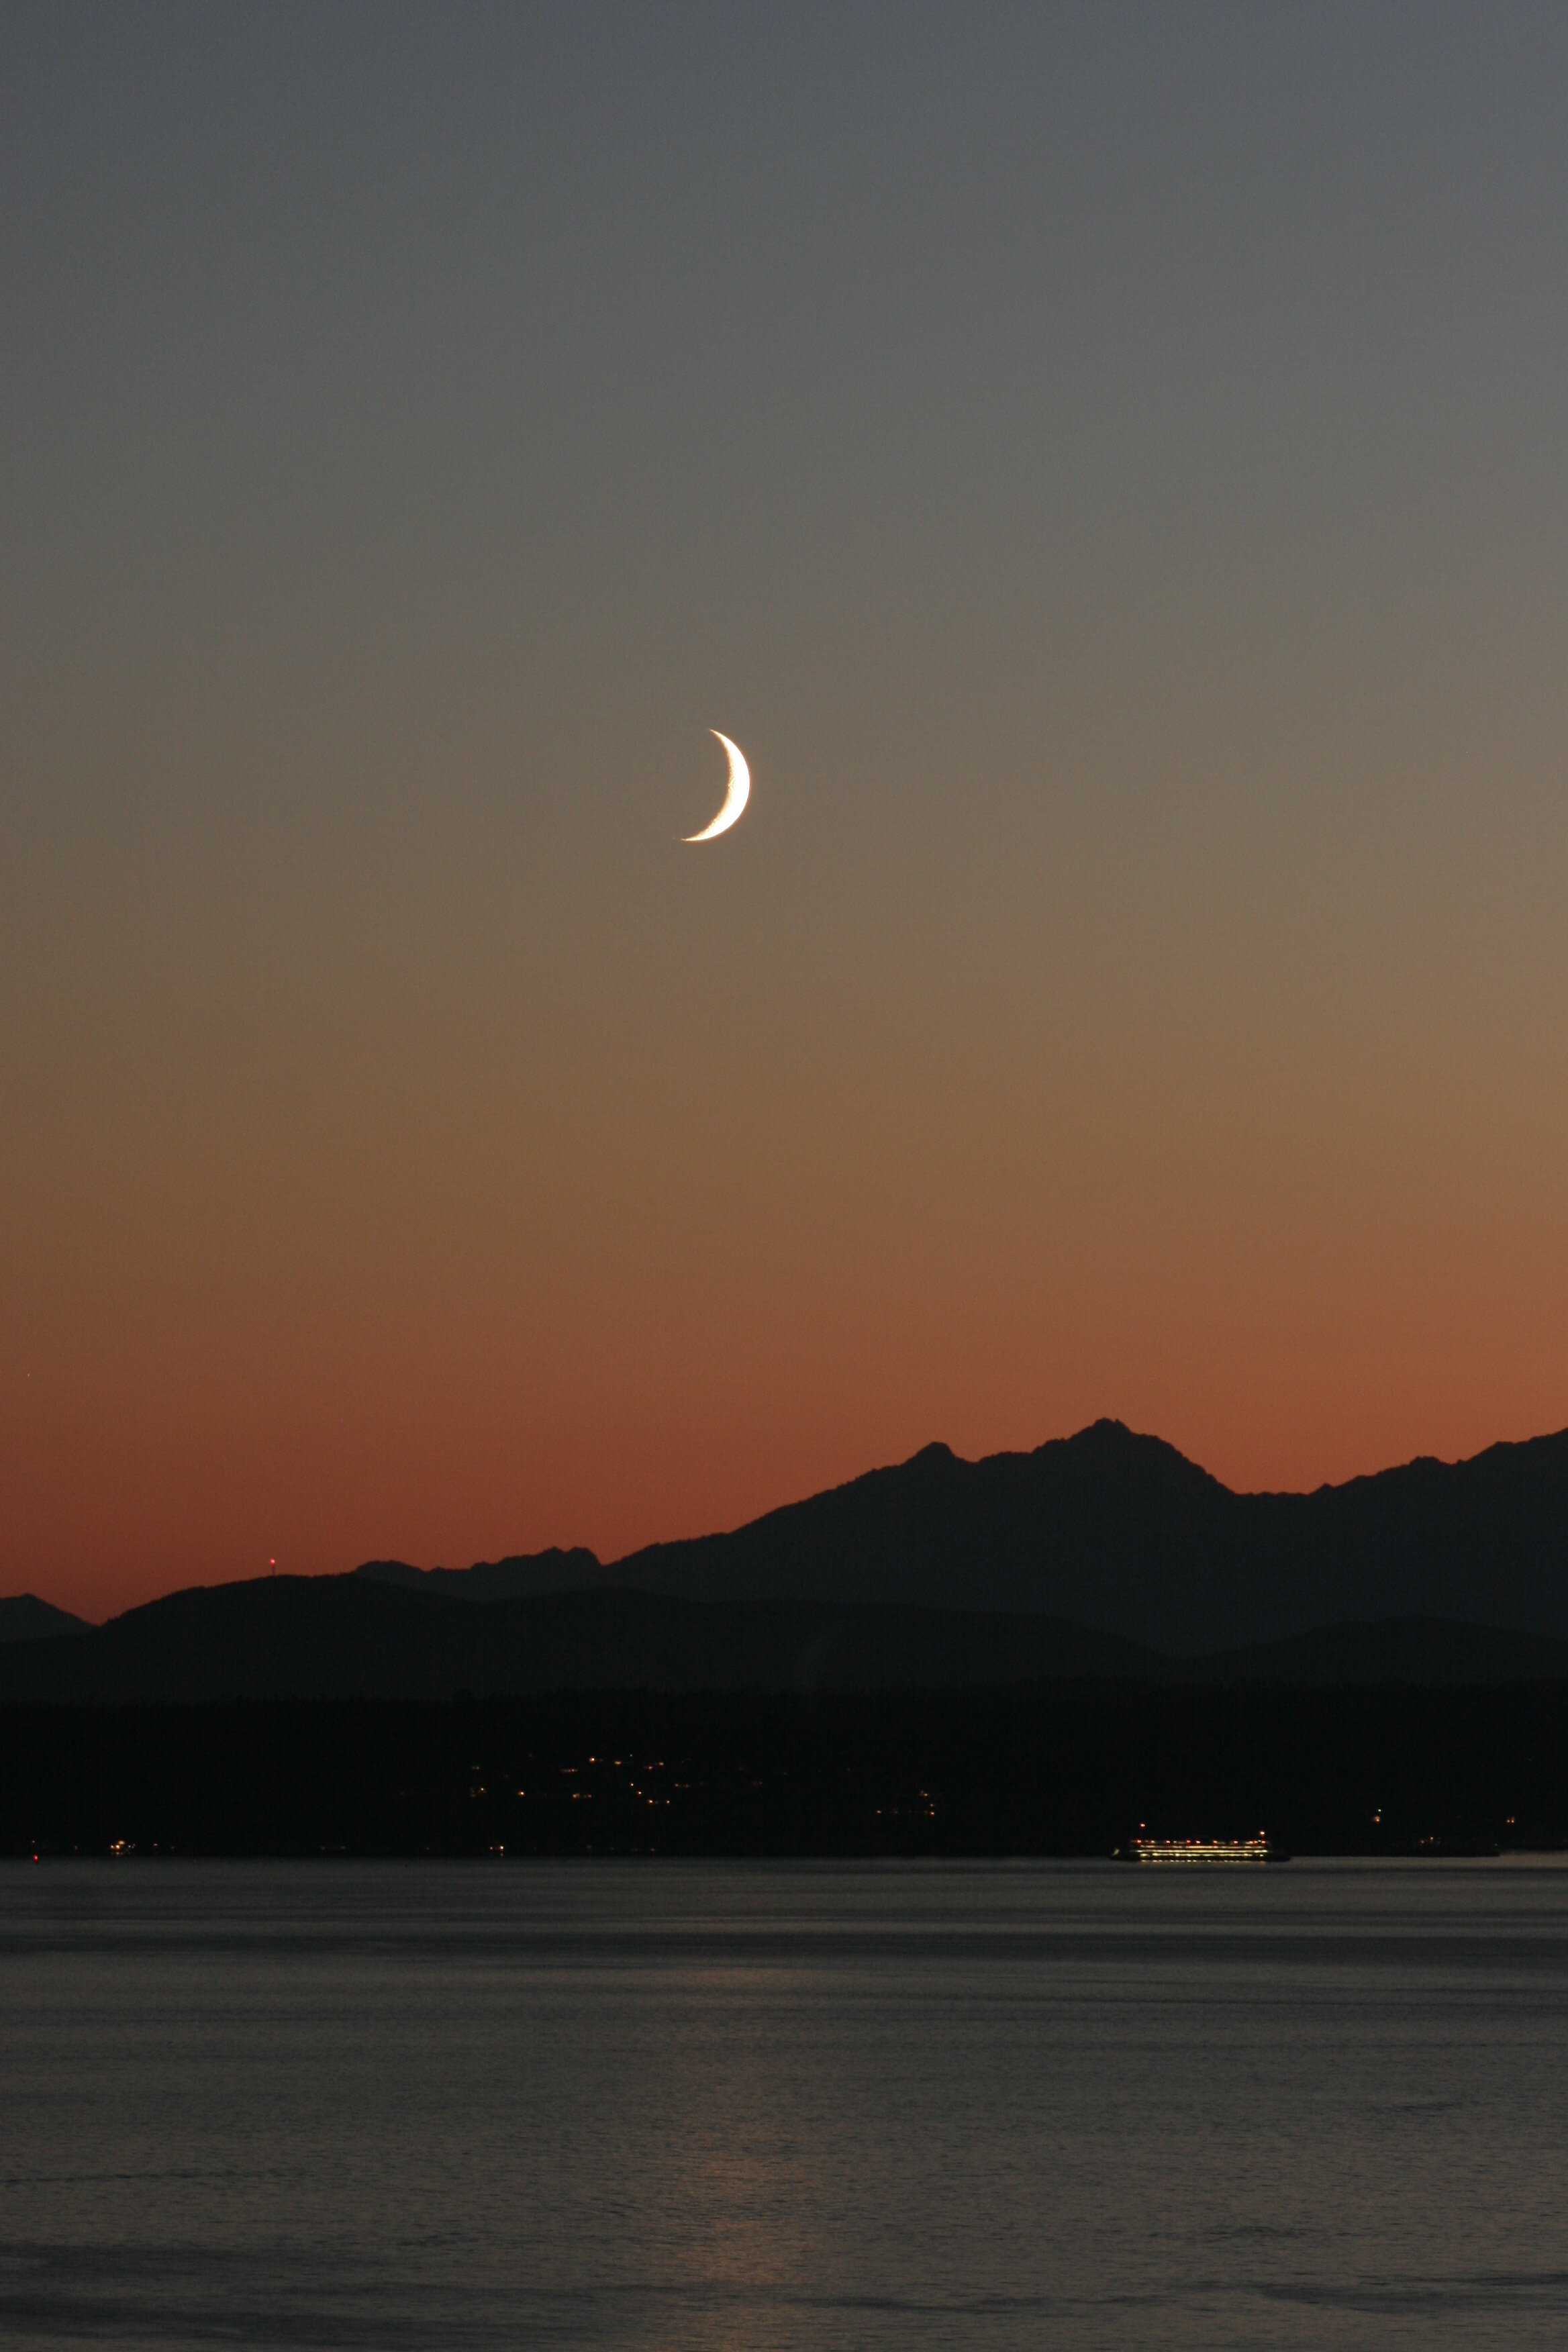 Moon/Sunset over The Olympic Mountains and Puget Sound - Seattle, WA